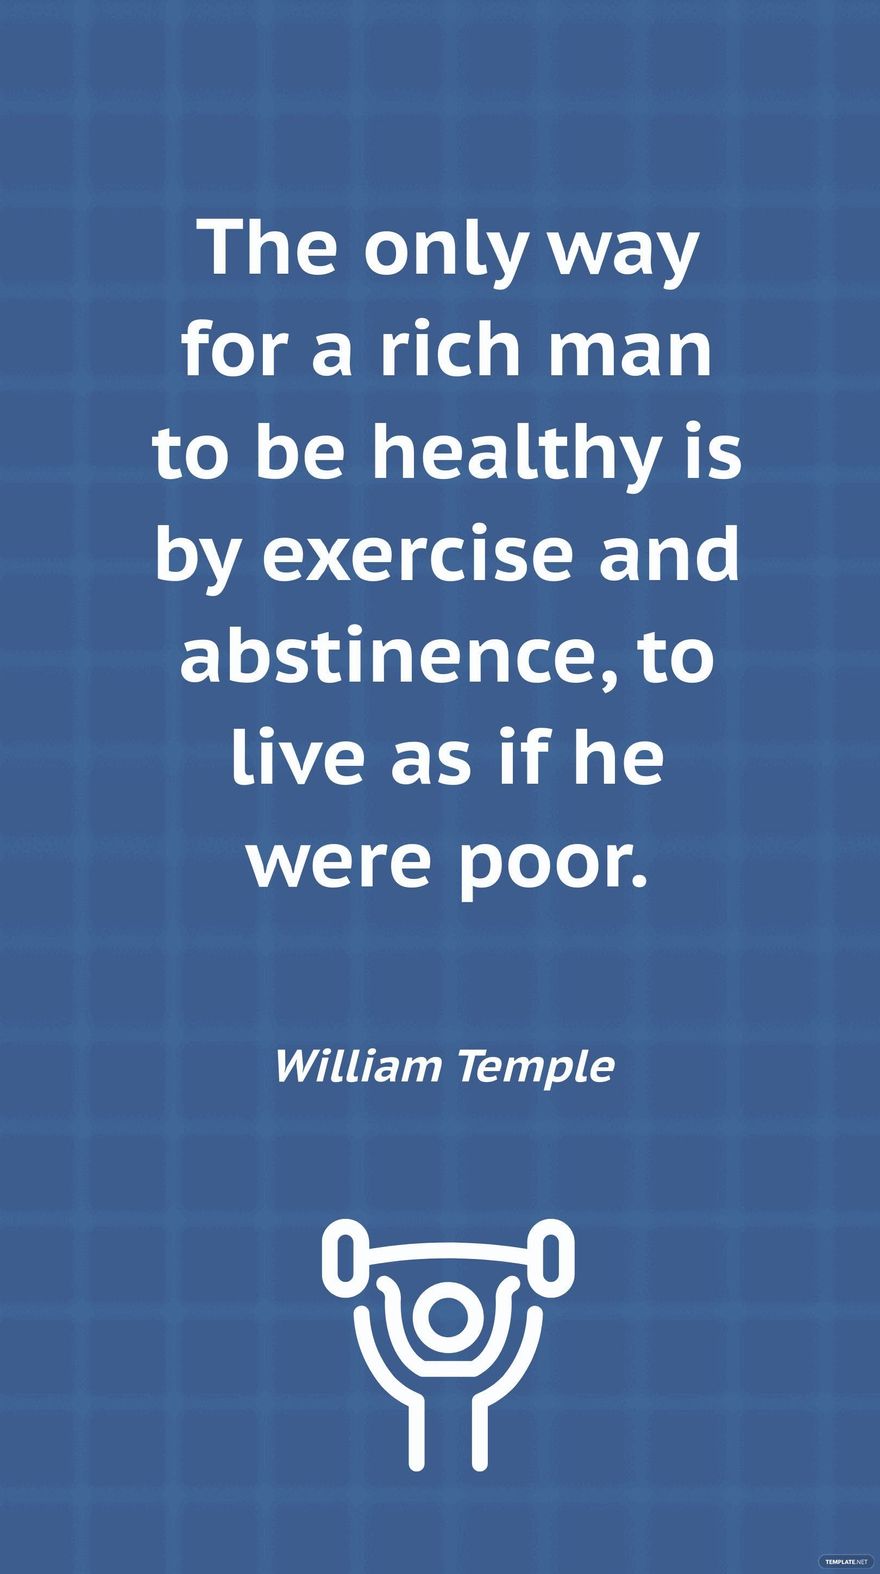 William Temple - The only way for a rich man to be healthy is by exercise and abstinence, to live as if he were poor.